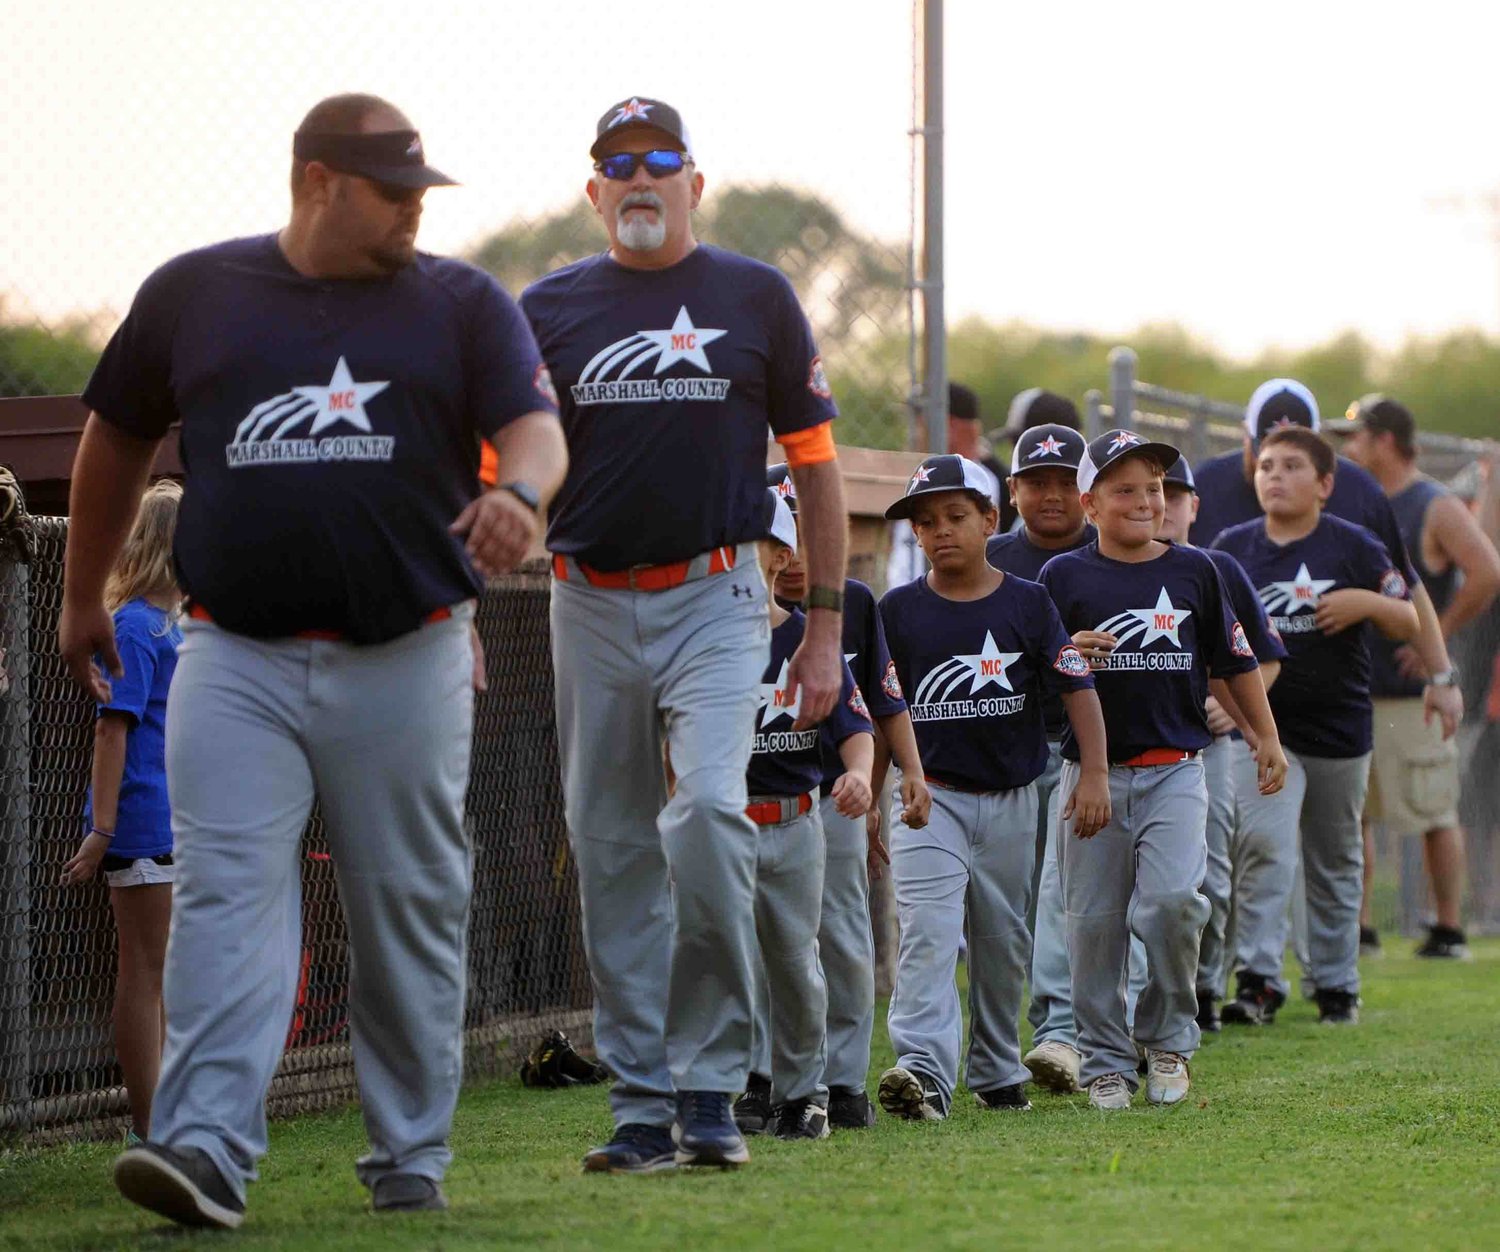 The 8-Year-Old Marshall County team was the first to be introduced during the opening ceremony on Friday night.